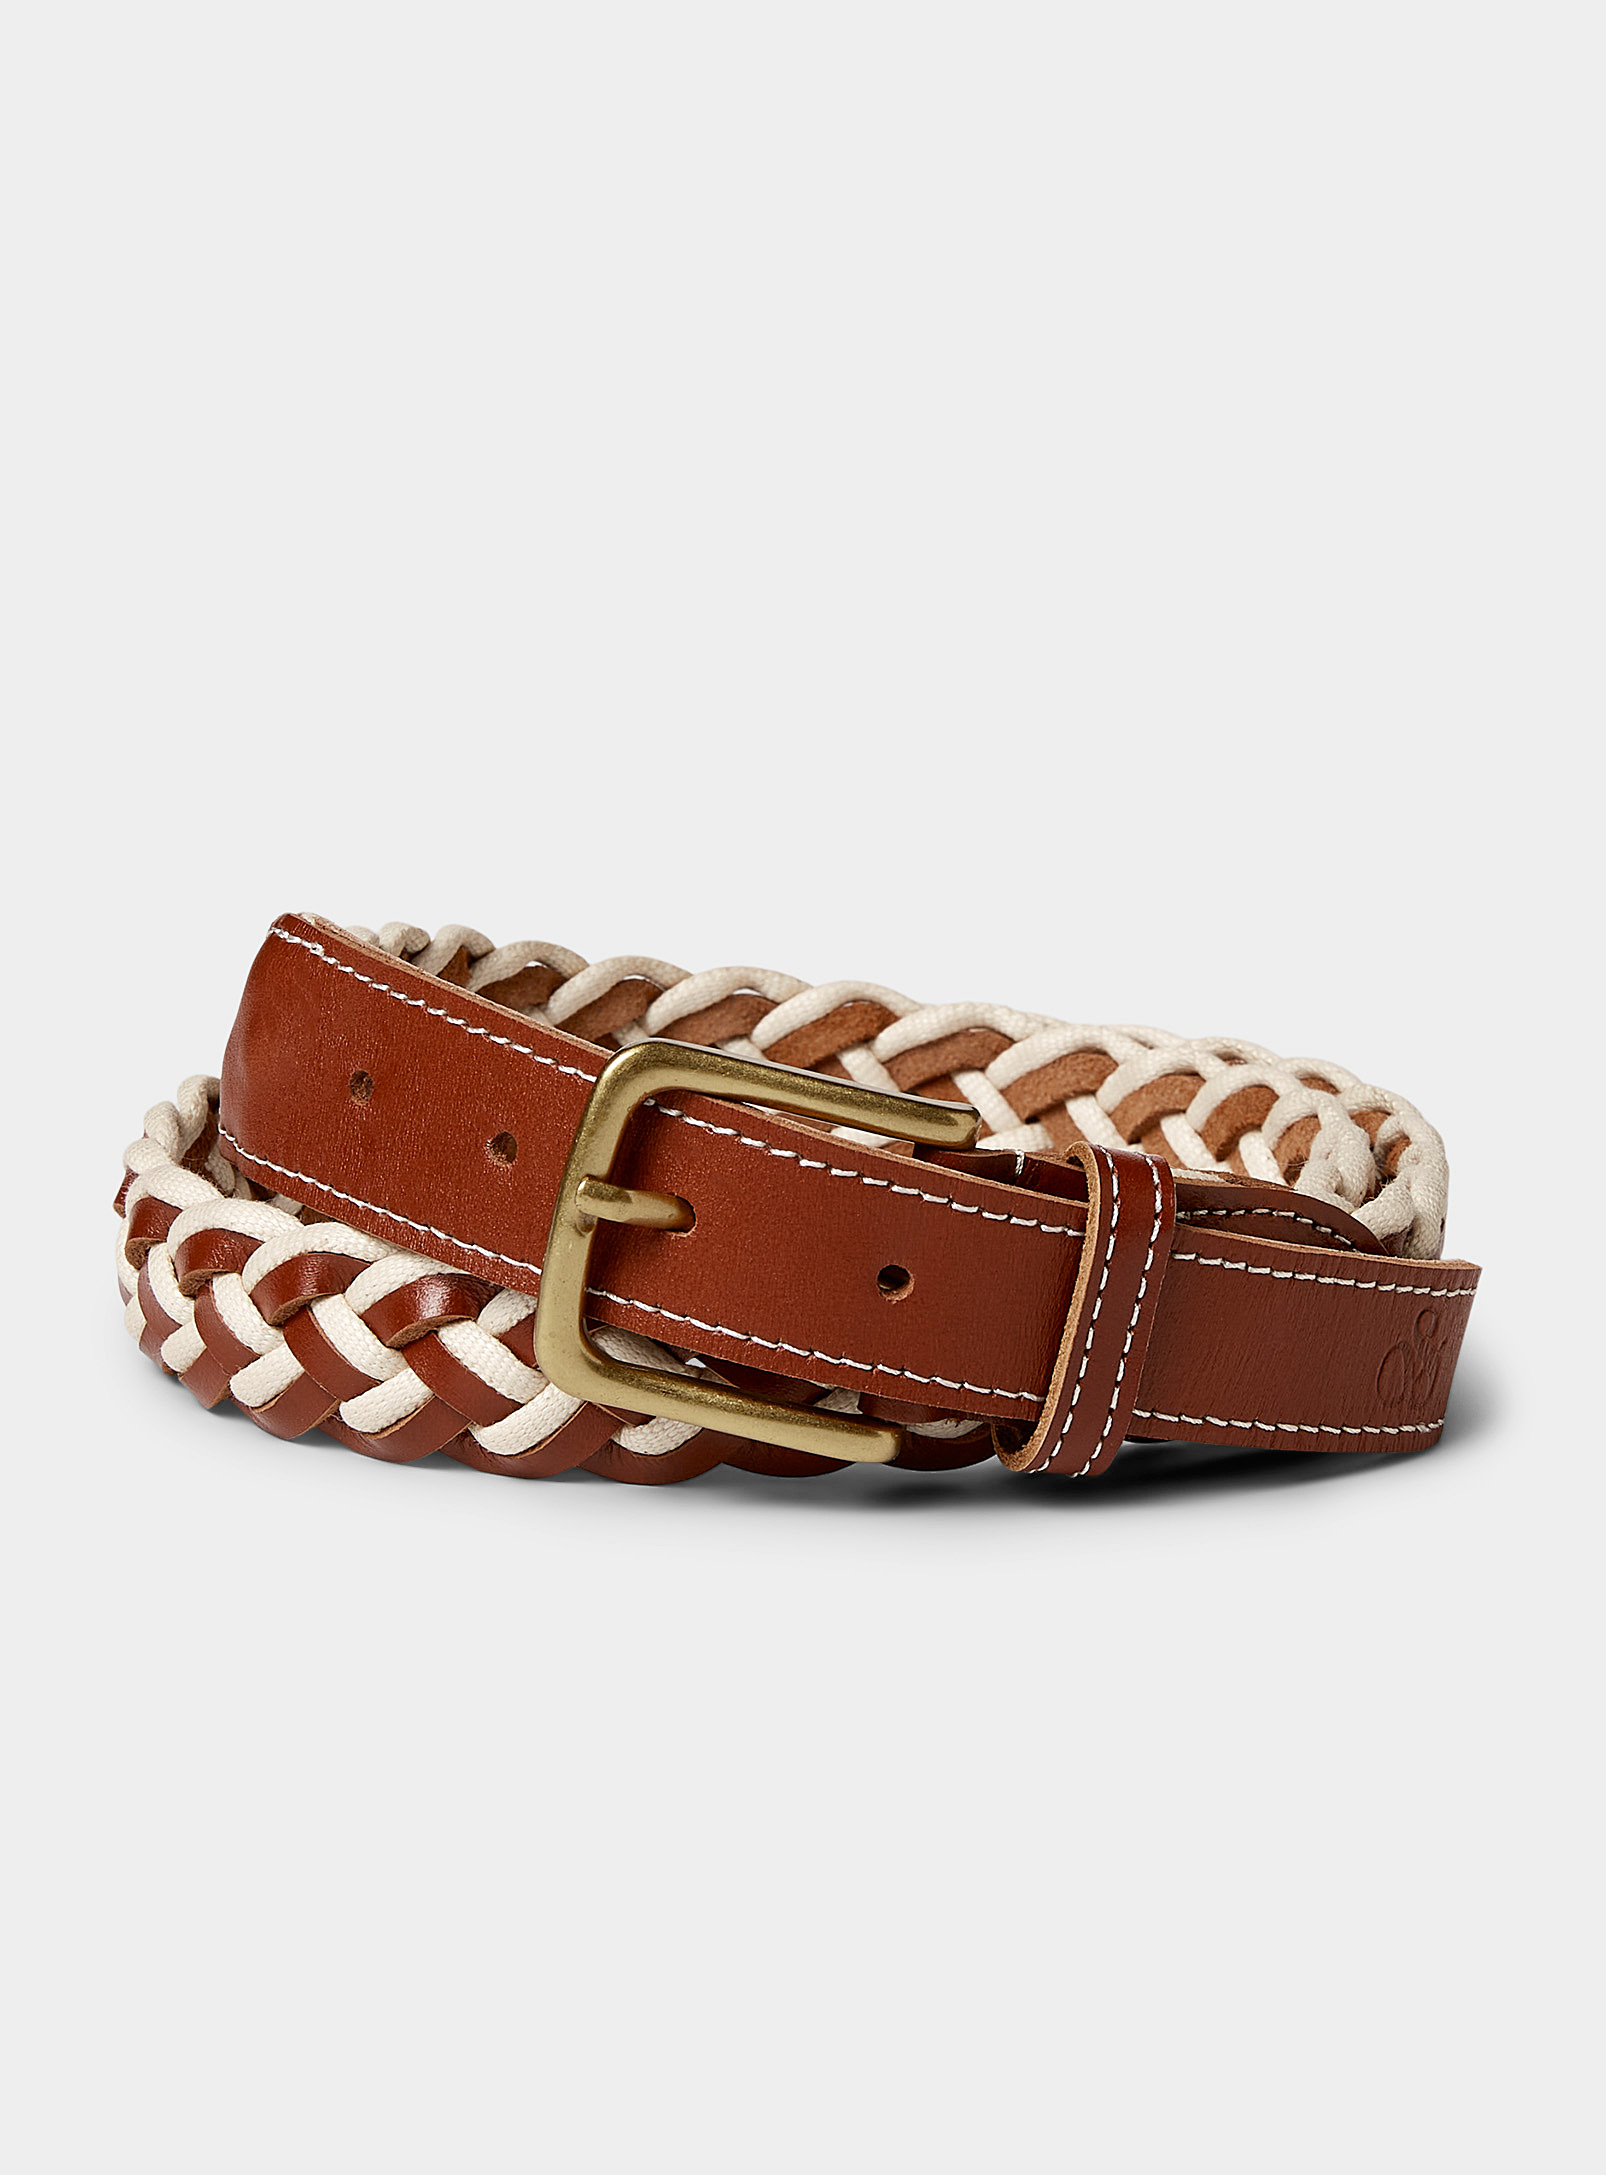 Scotch & Soda - Men's Cord and brown leather braided belt